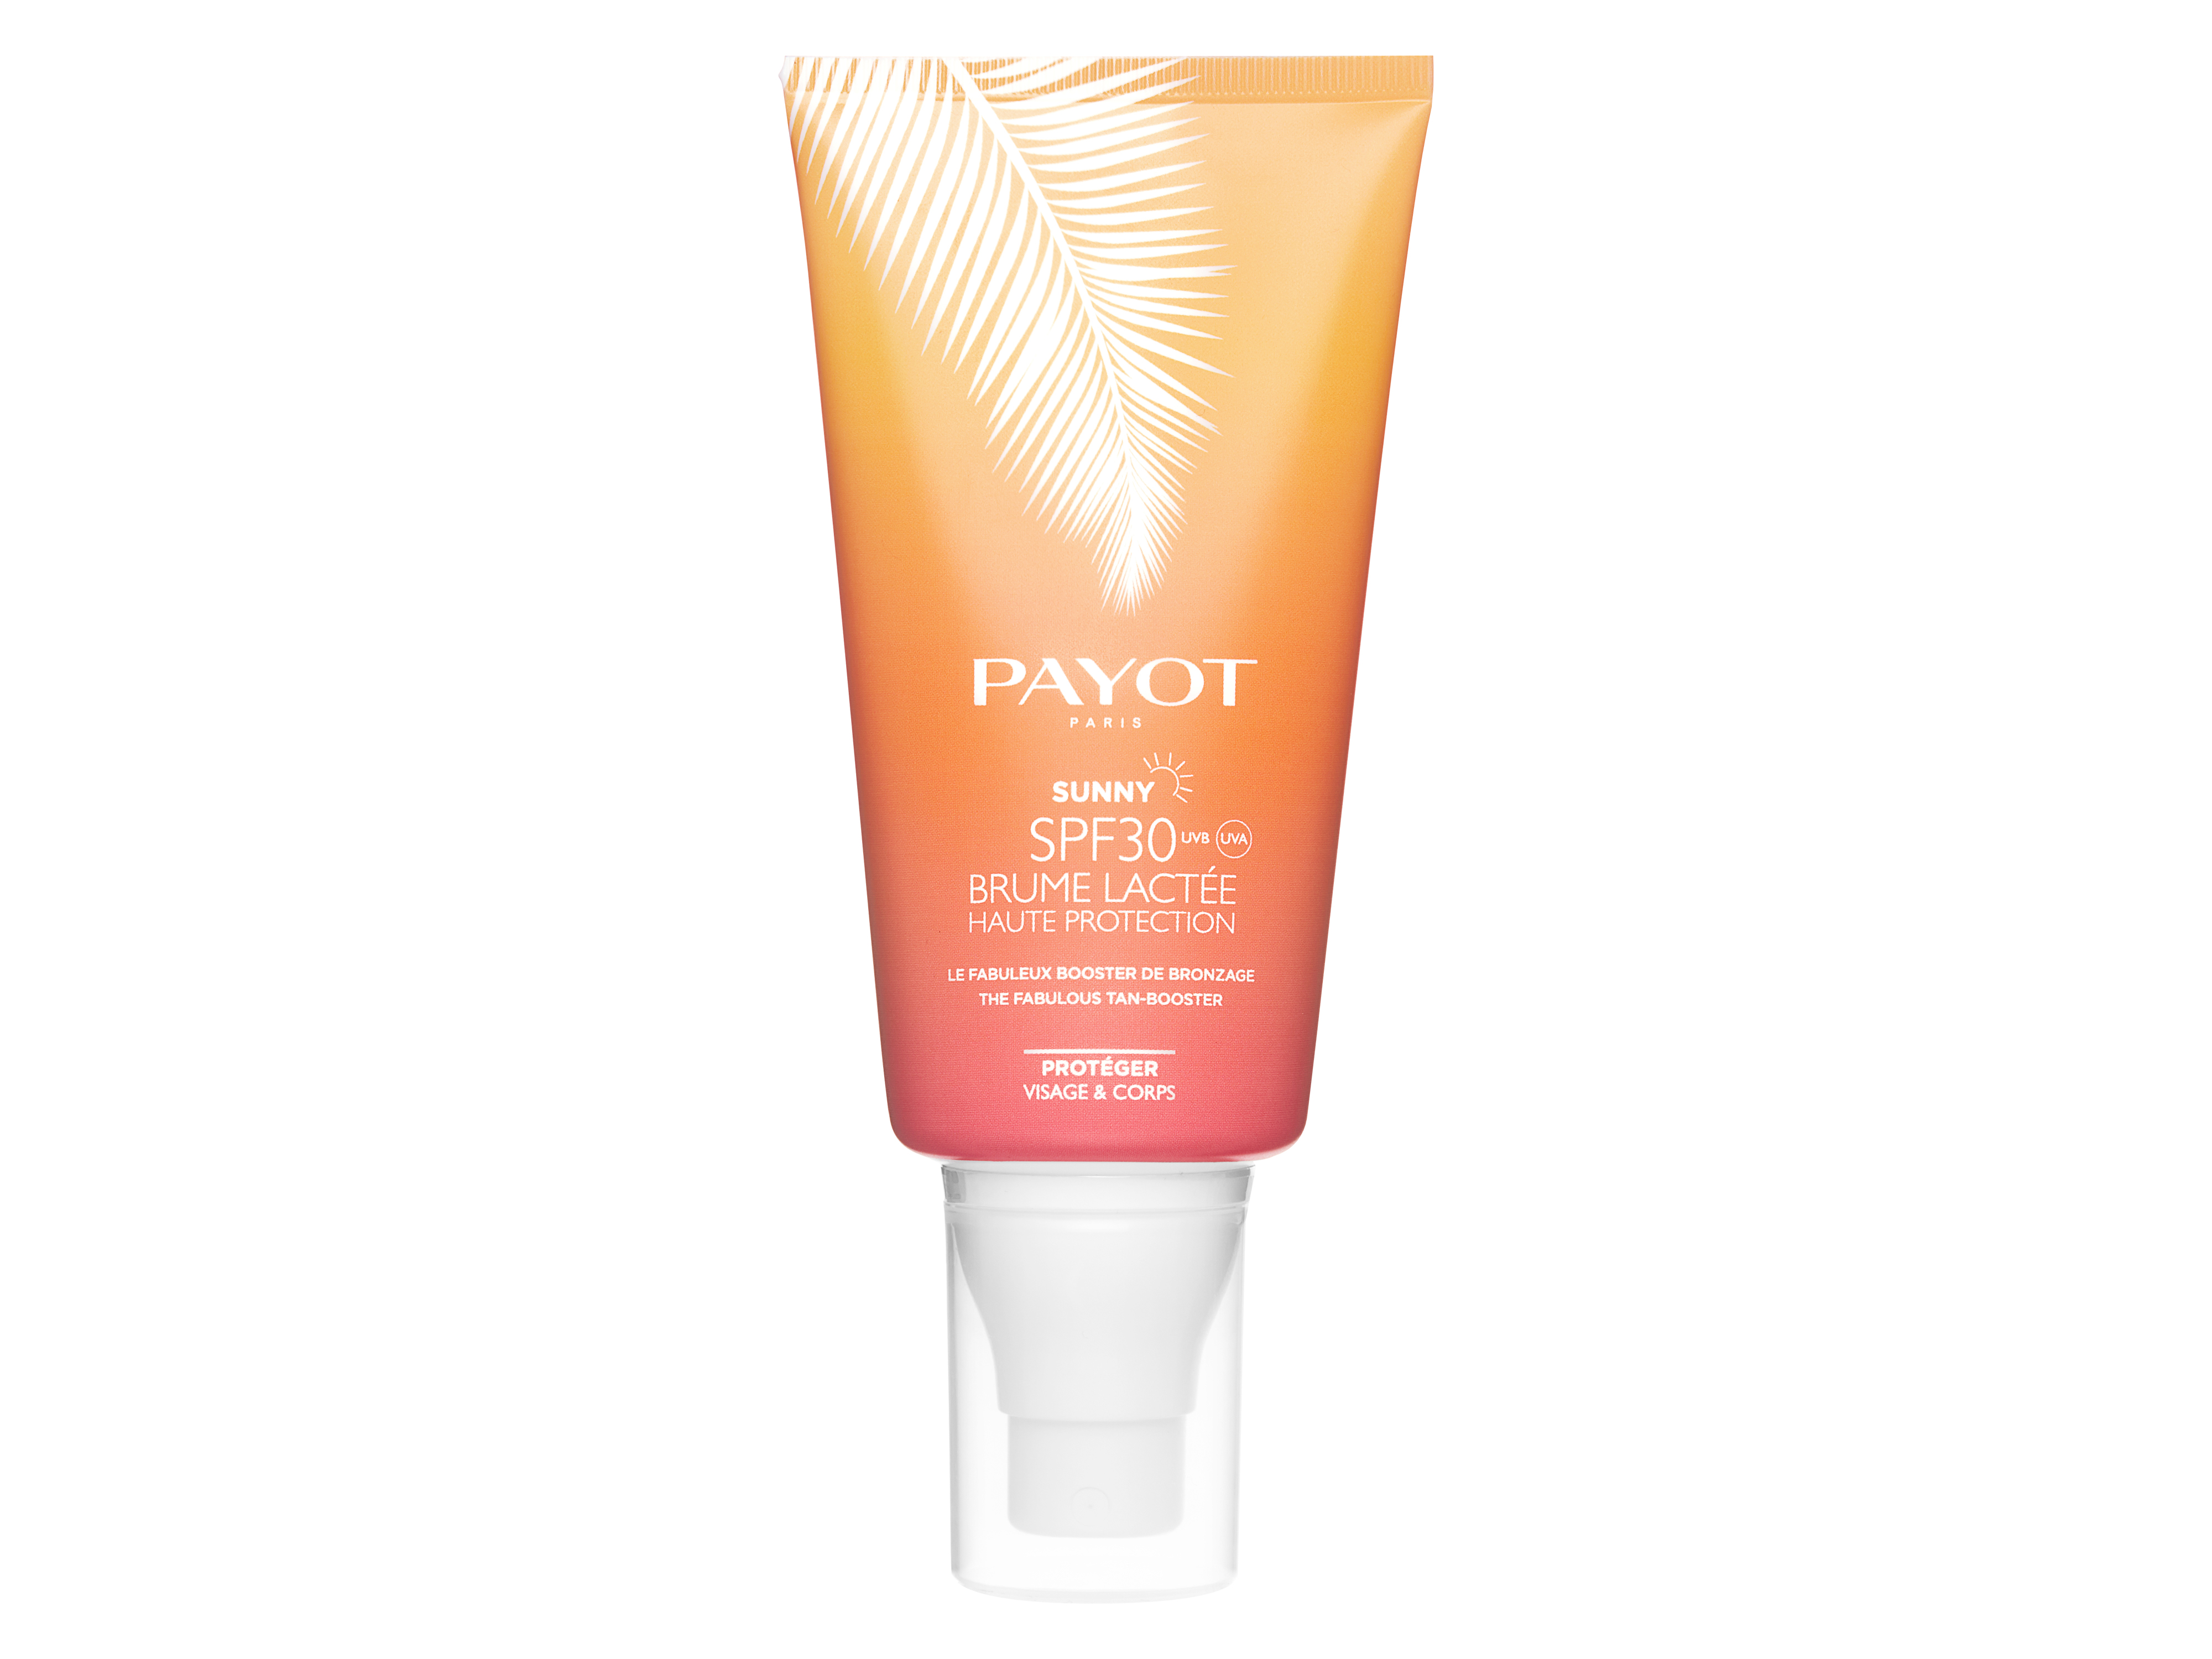 Payot Sunny Brume Lactée Face and Body SPF30, 150 ml